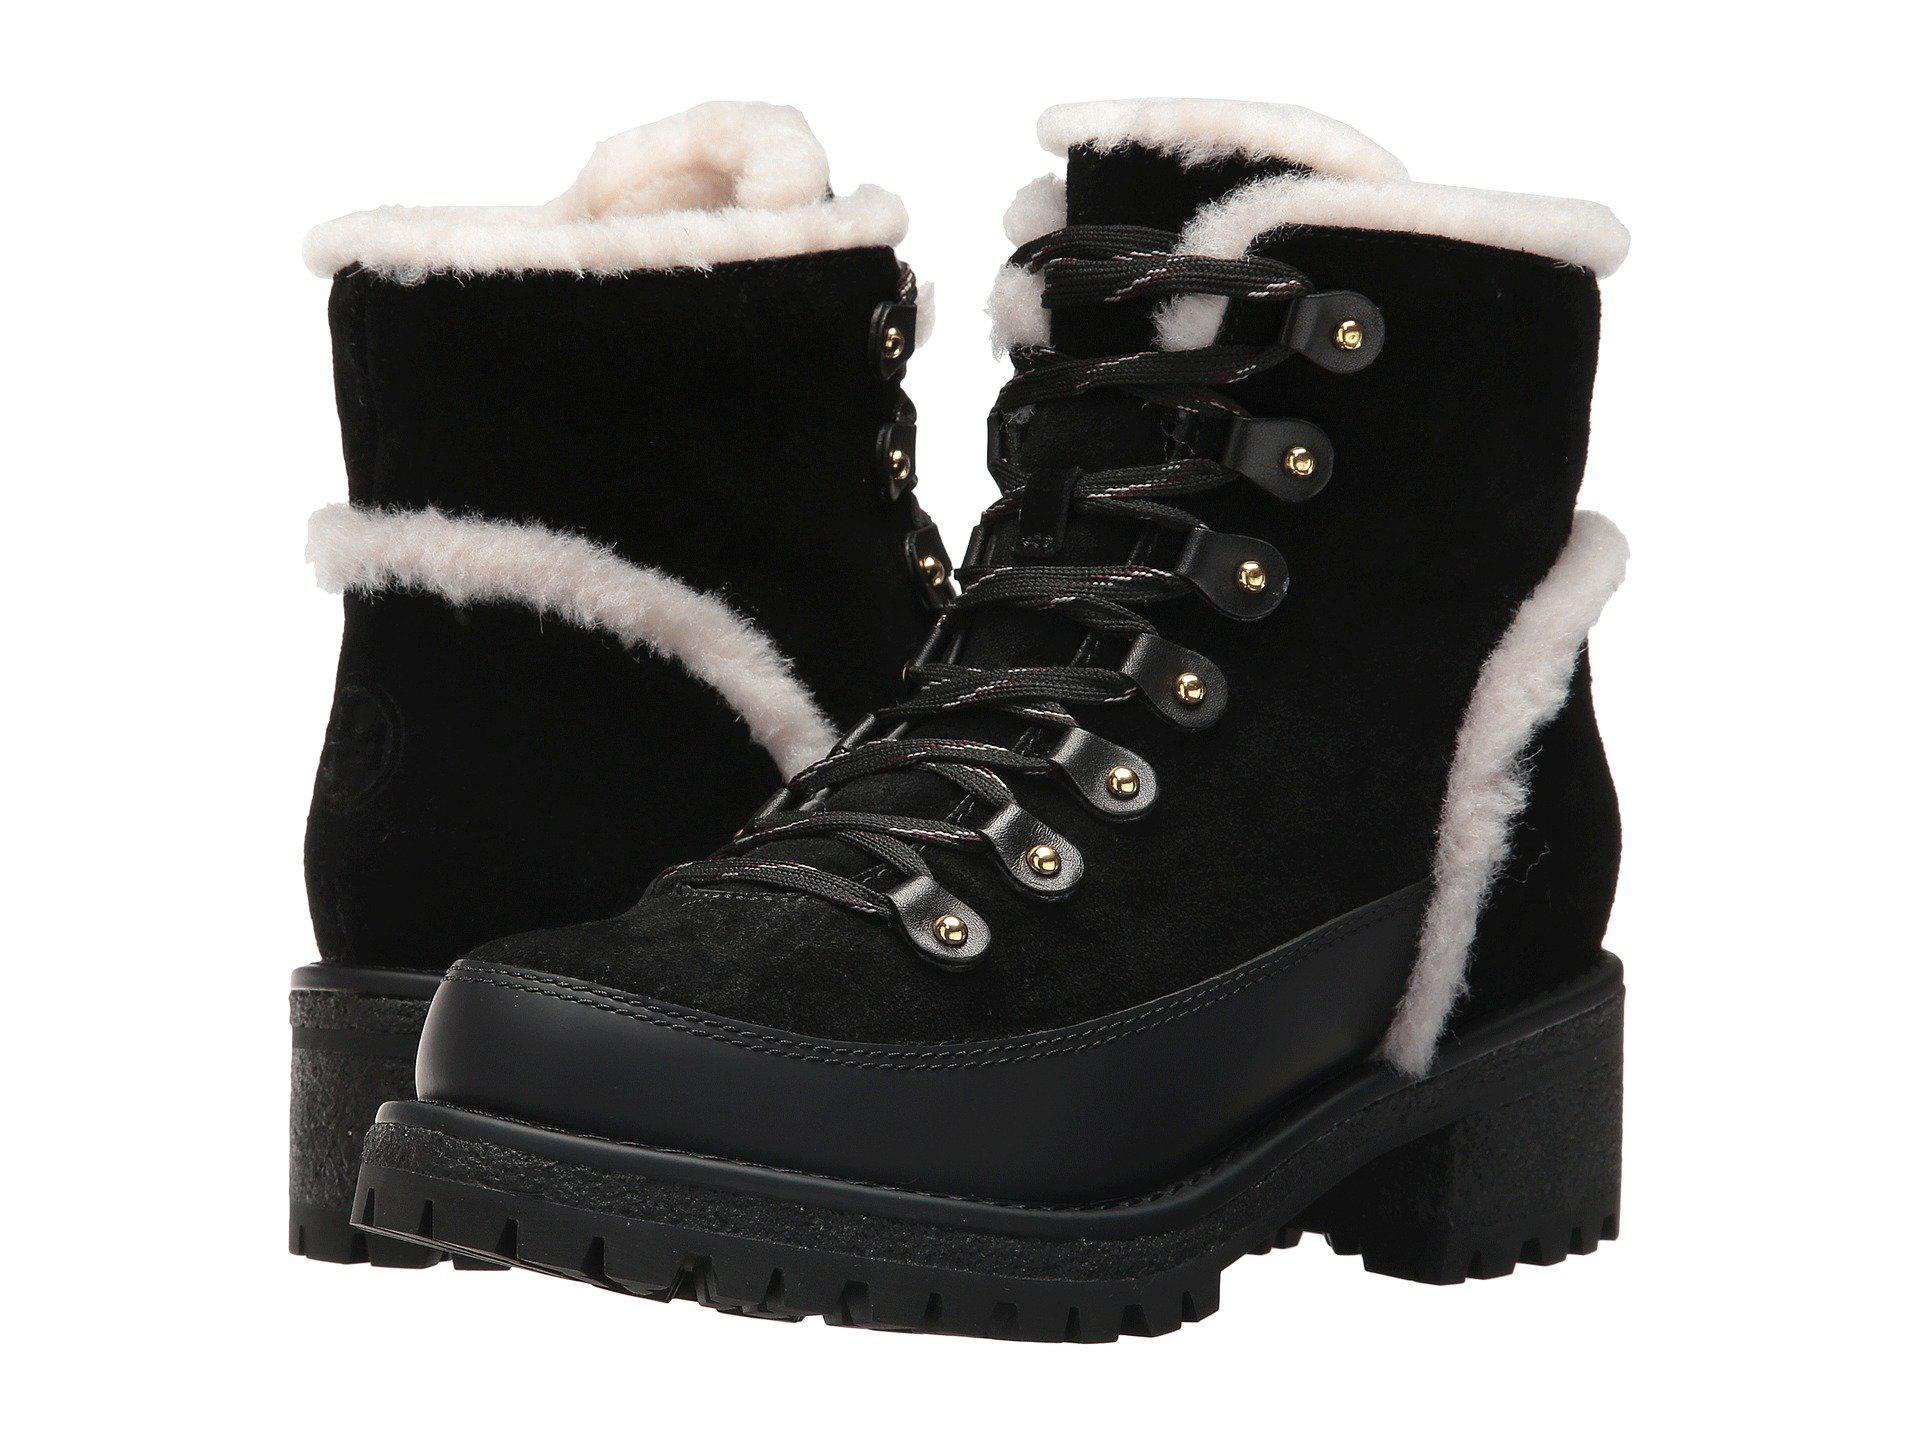 Tory Burch Cooper Shearling Boot Best Sale, SAVE 60%.